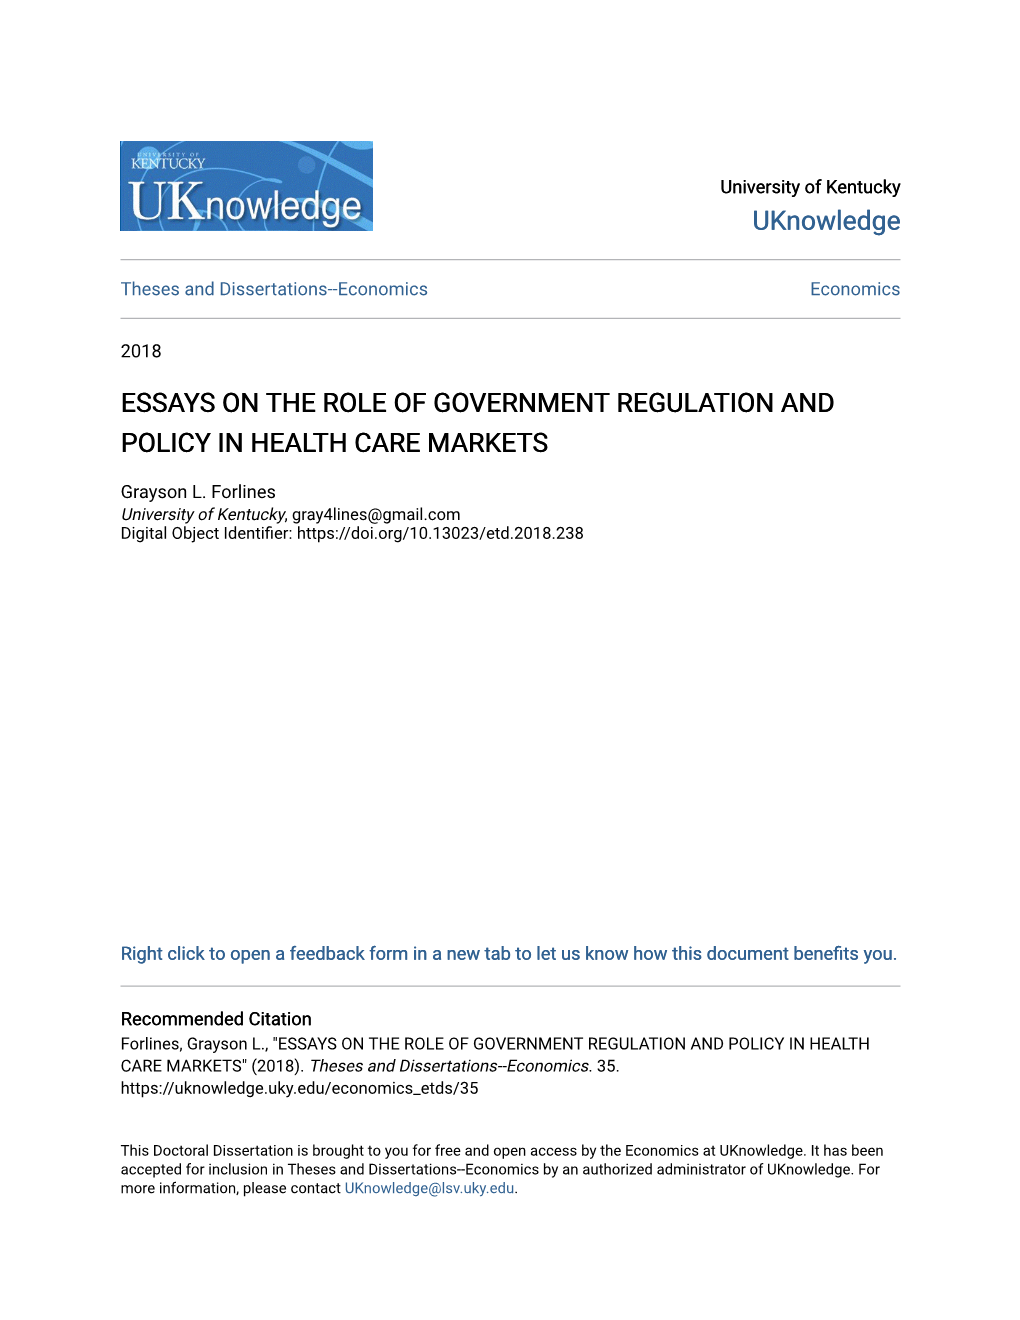 Essays on the Role of Government Regulation and Policy in Health Care Markets